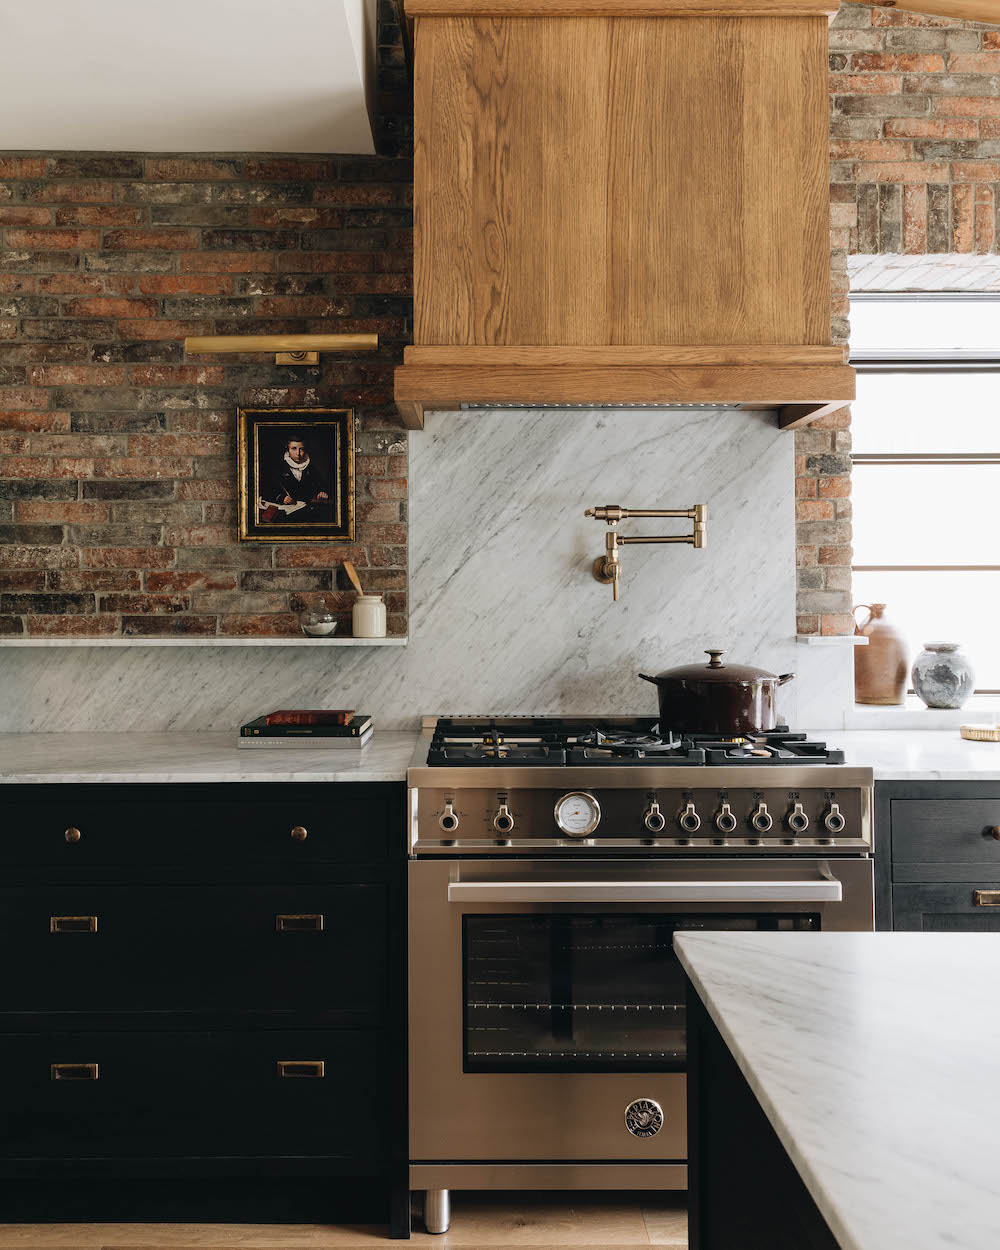 Brick-walled kitchen with little painting